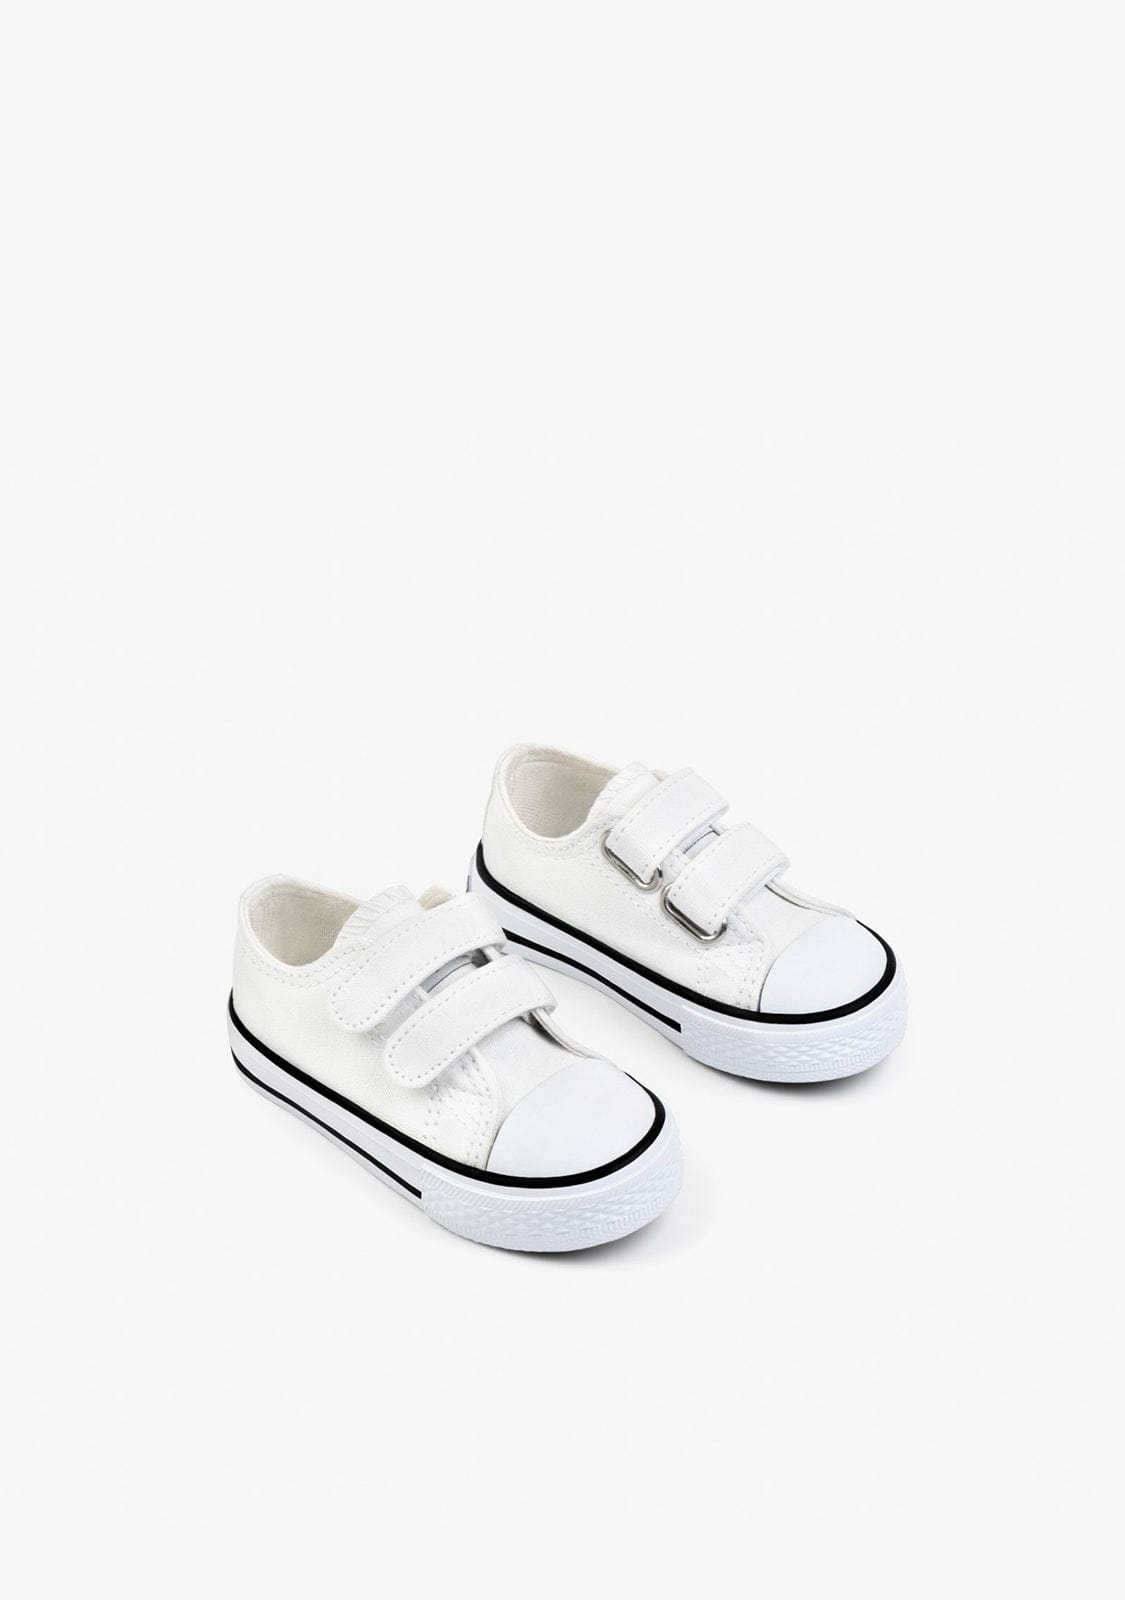 OSITO Shoes Baby's White Basic Sneakers Canvas